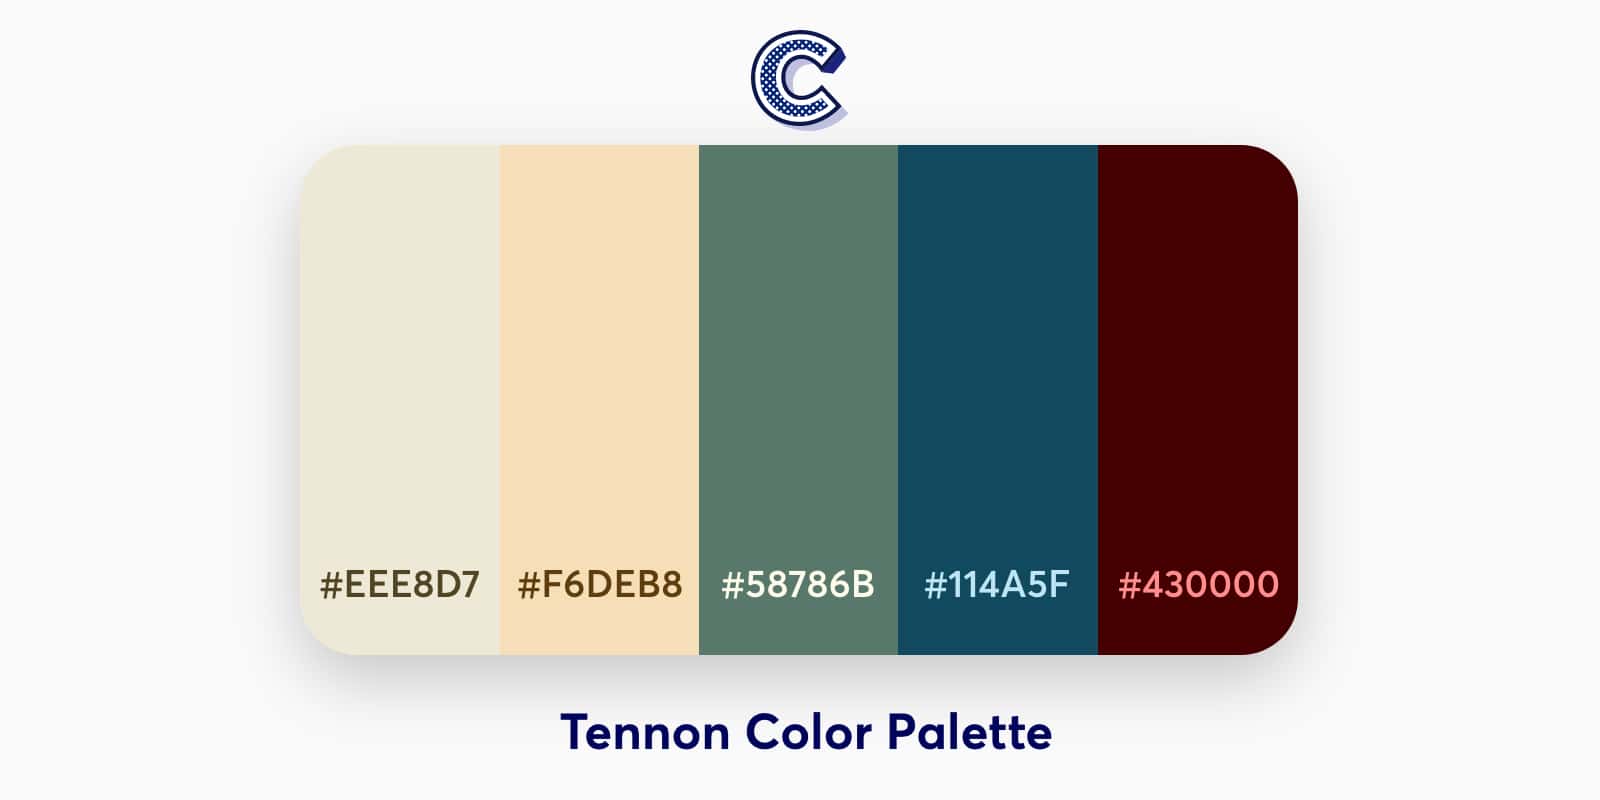 the featured image of tennon color palette